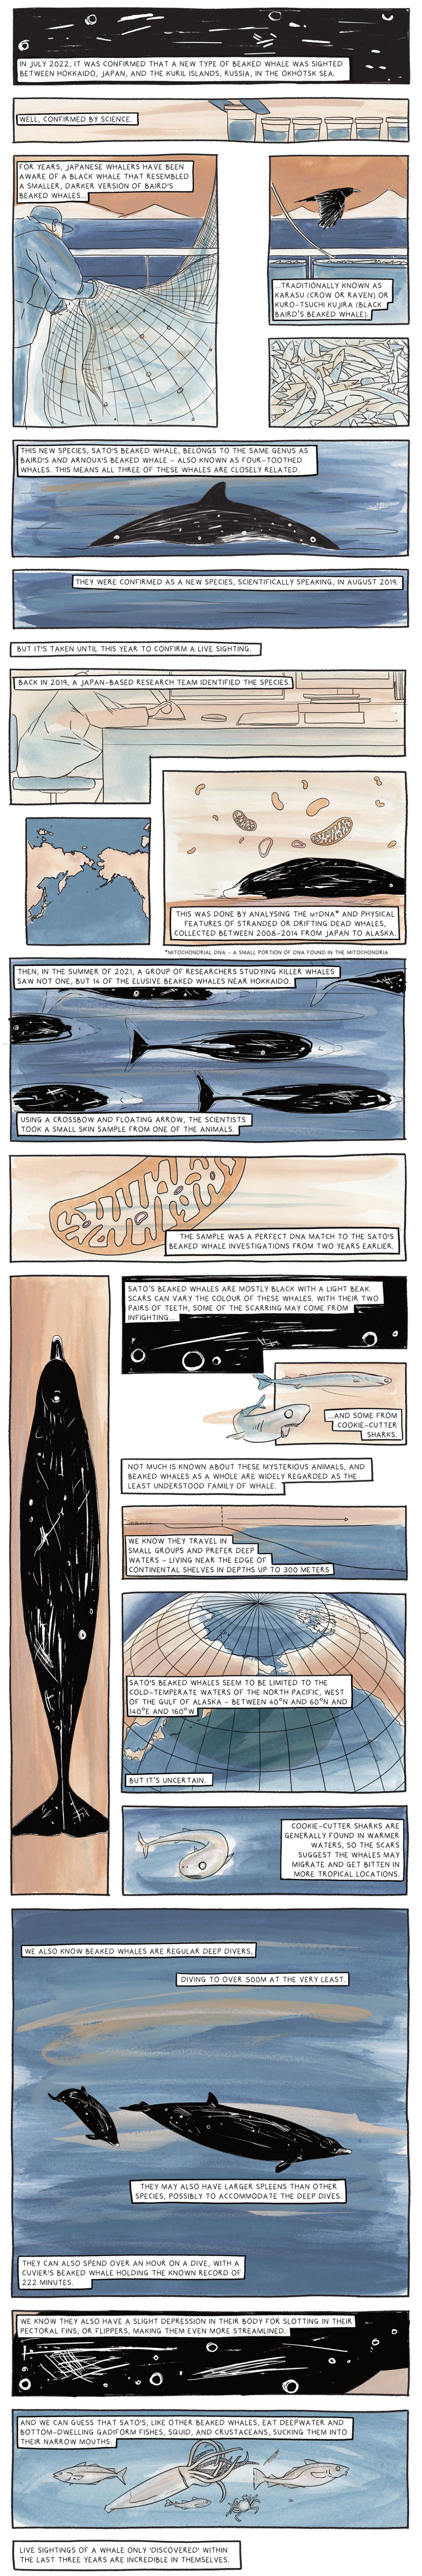 Comic about the discovery of the Sato's beaked whale